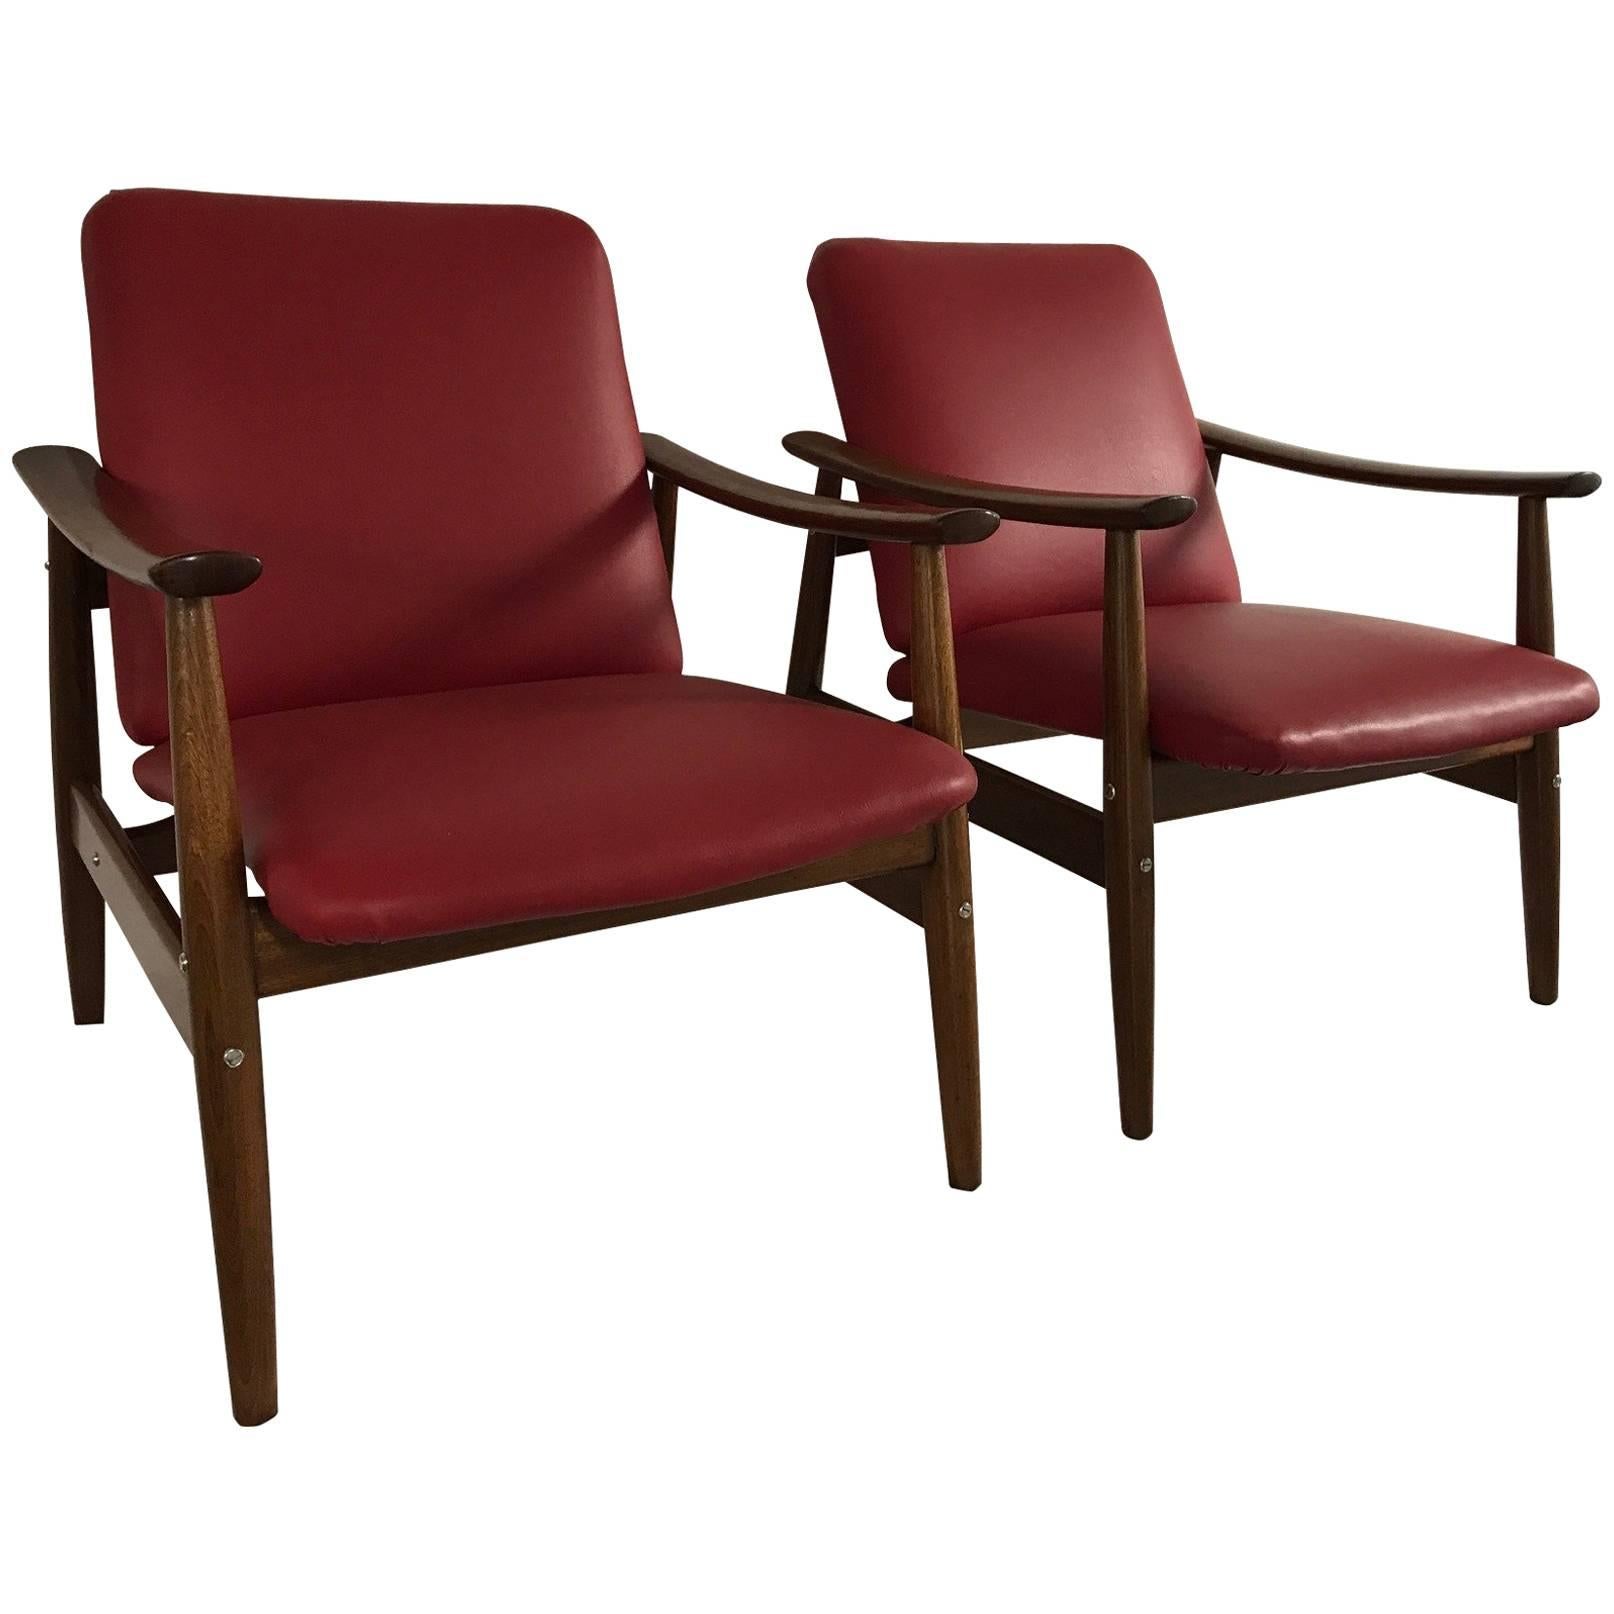 Pair of Armchairs by Altamira, Portugal, 1960s